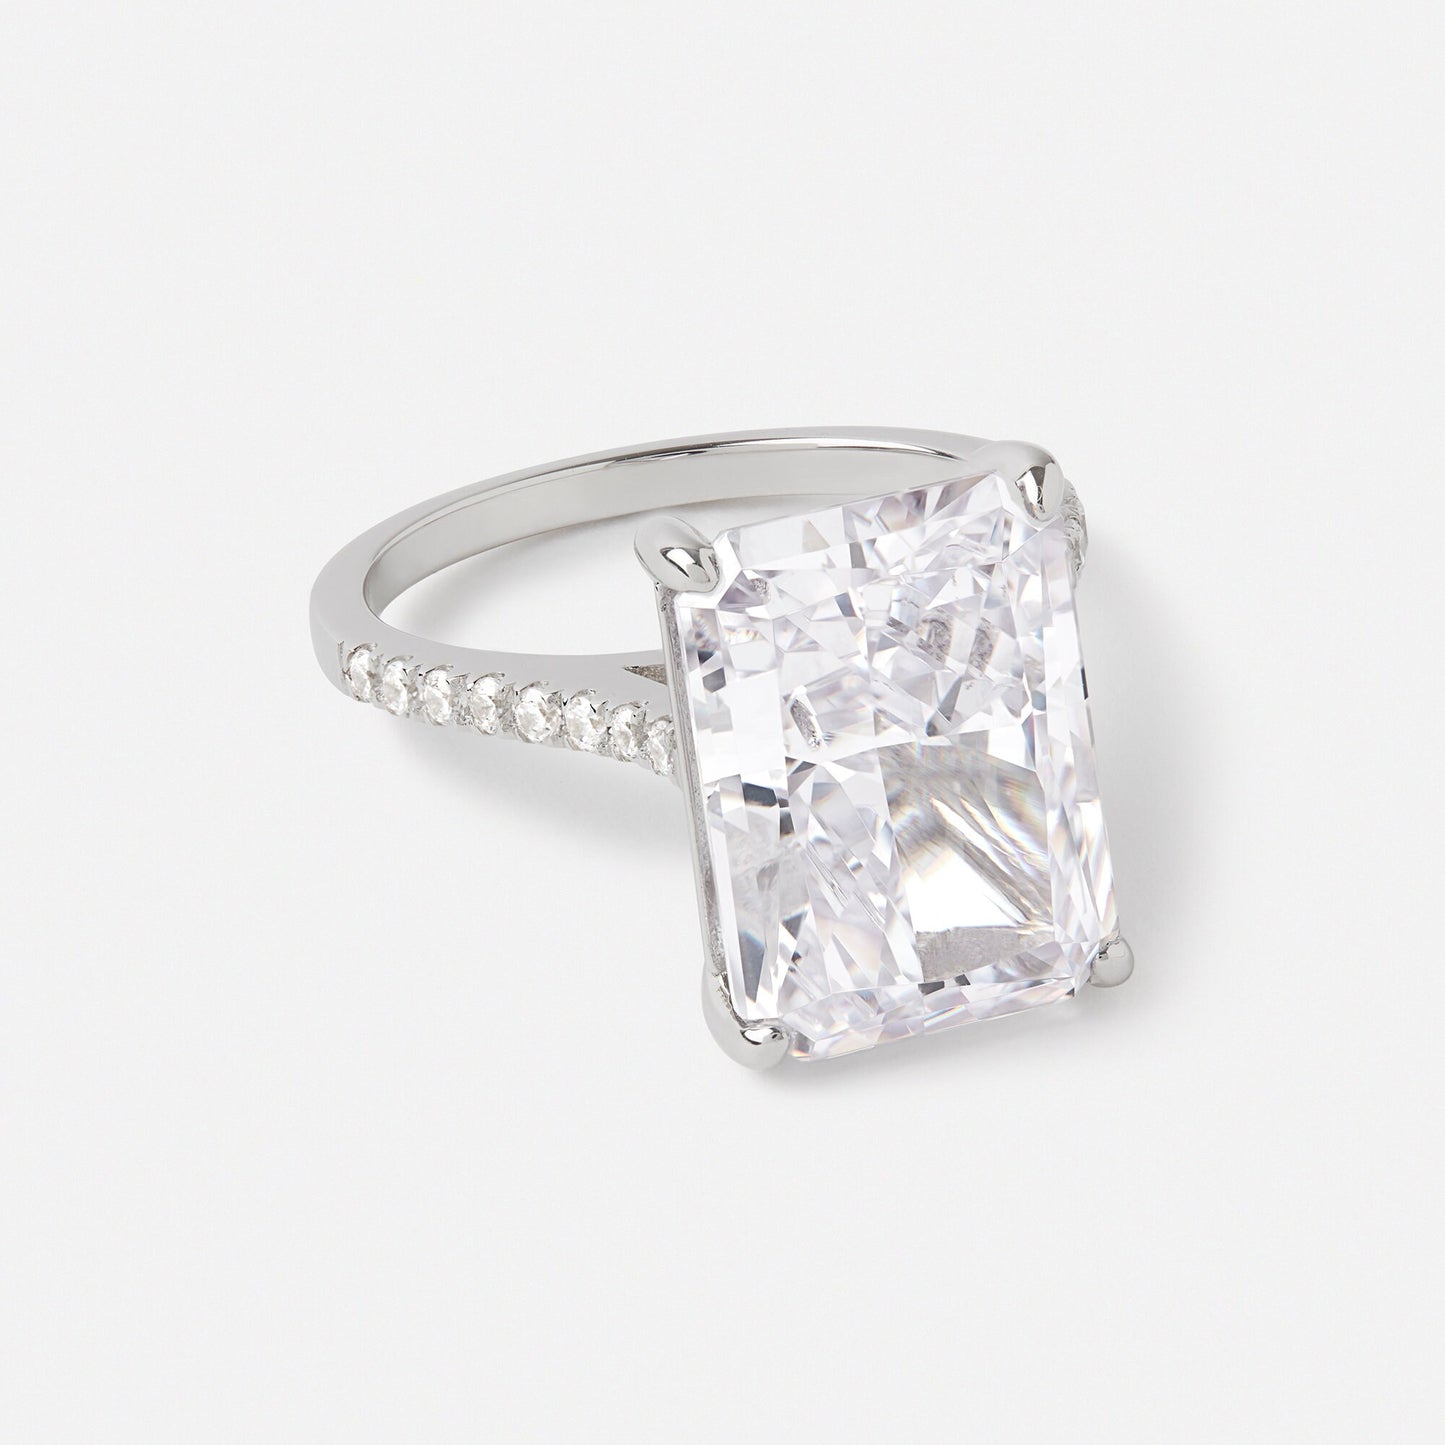 8.7ct Radiant cut Moissanite solitaire ring in solid gold or platinum - engagement ring